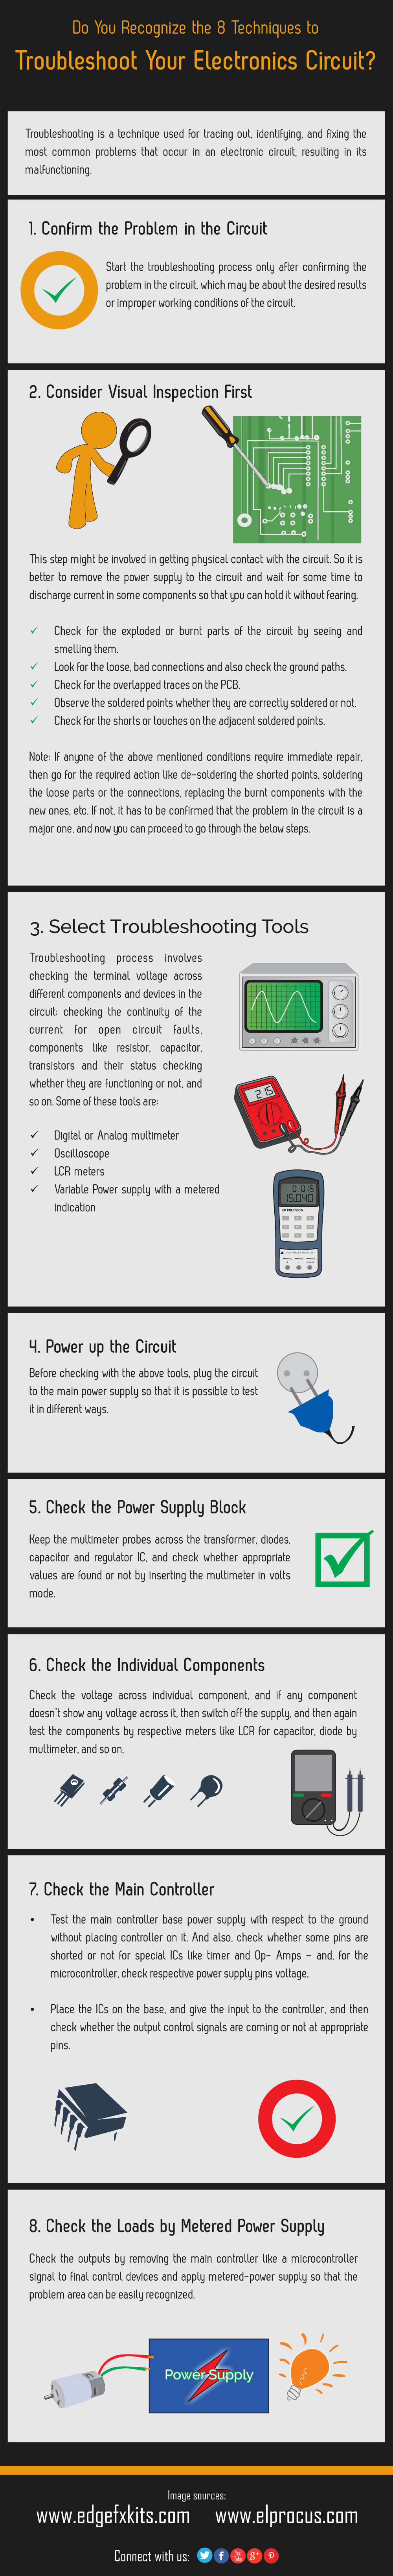 electrical circuit troubleshooting guide